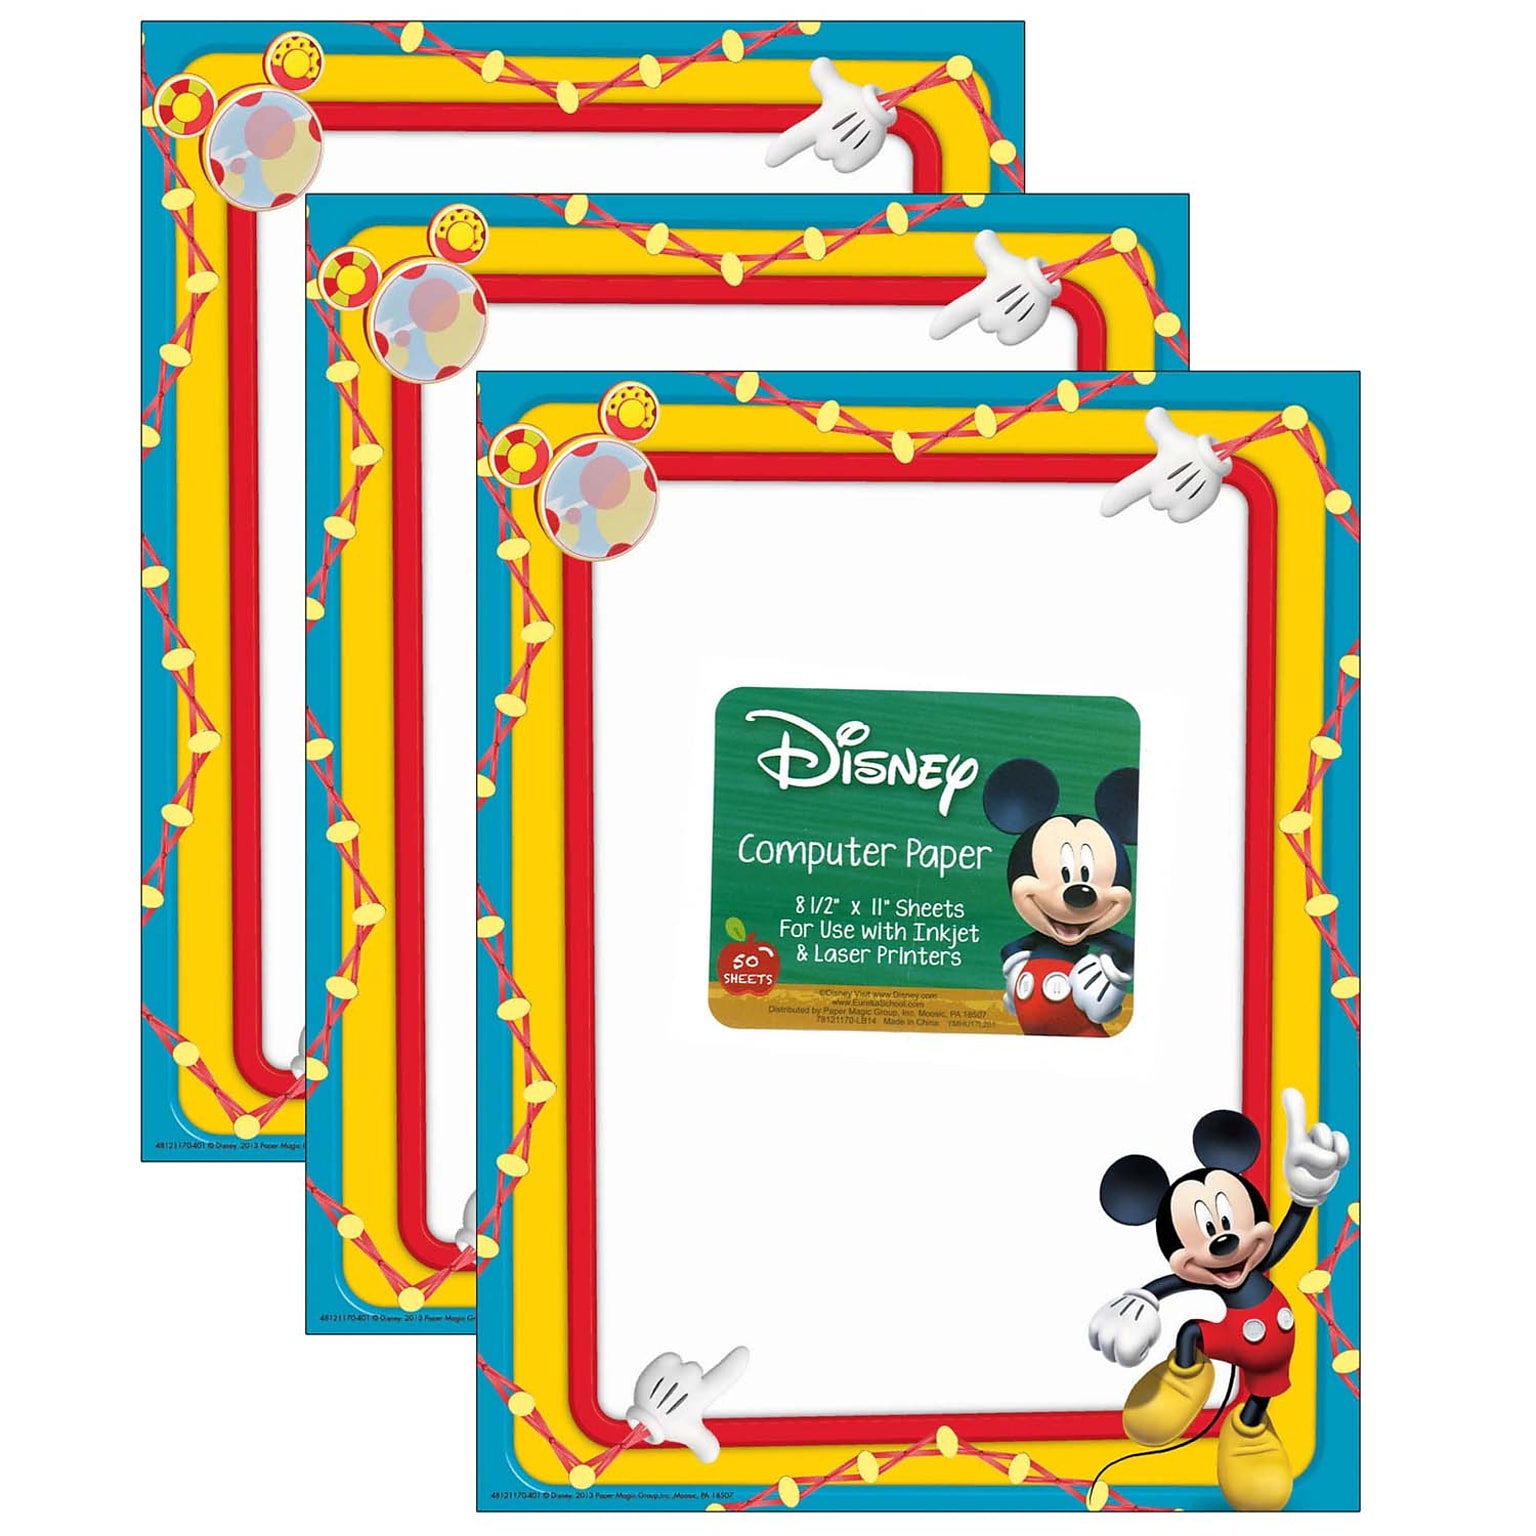 Eureka Mickey Mouse Clubhouse Primary Colors Computer Paper, 8.5 x 11, 50 Sheets/Pack, 3 Packs (EU-812117-3)